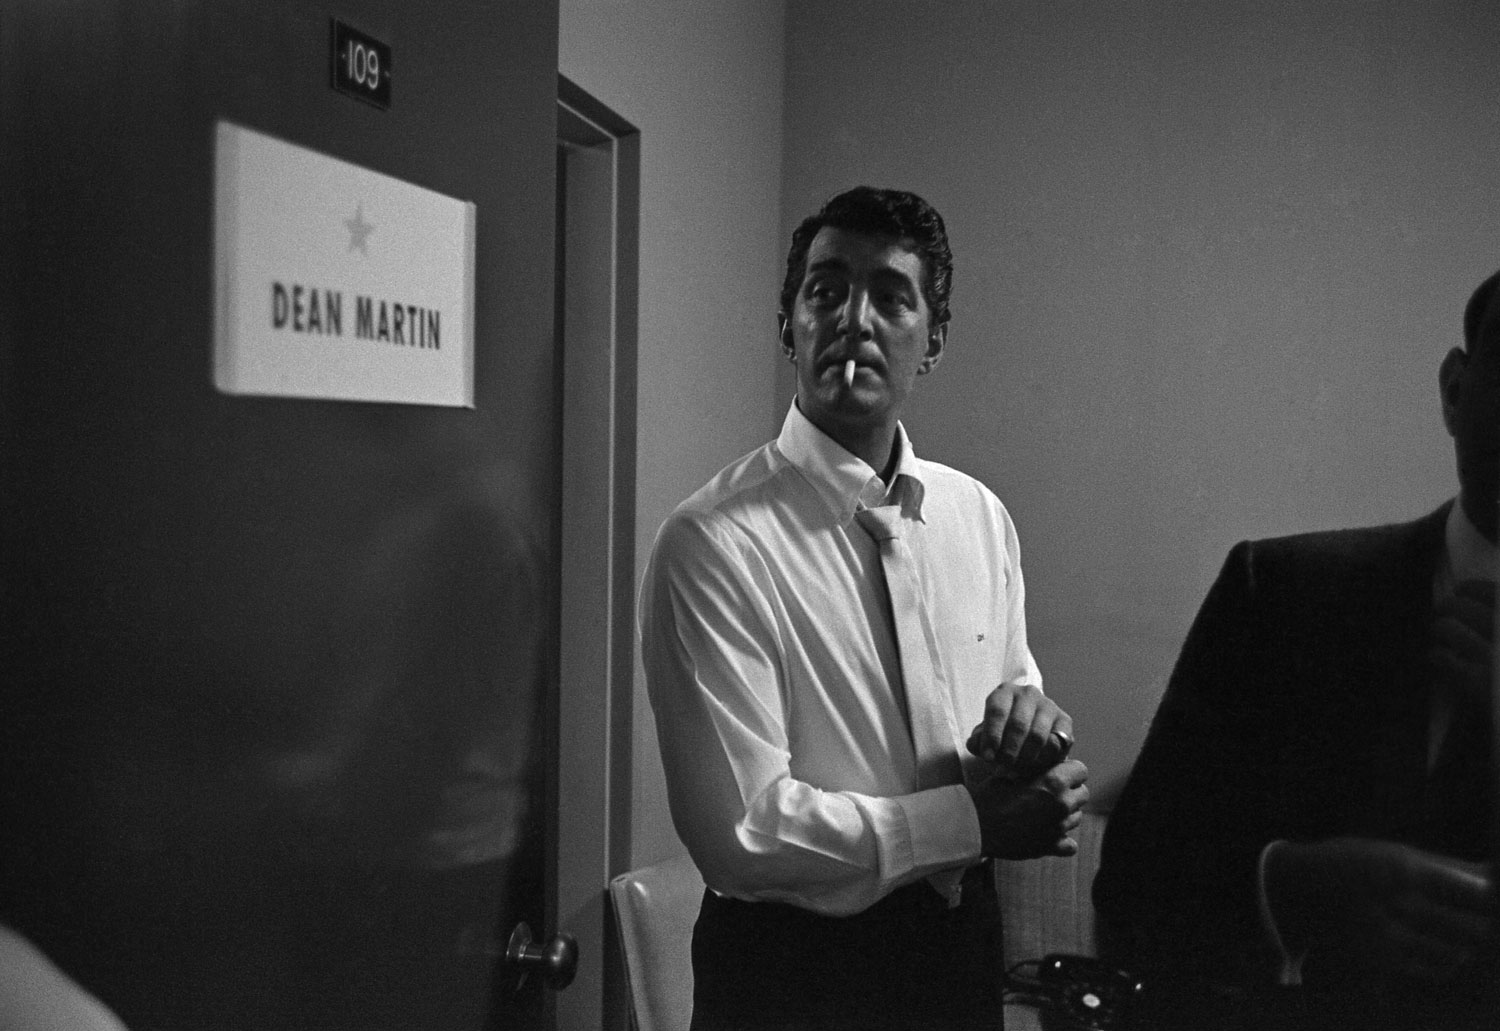 Dean Martin smokes a cigarette beside his dressing room door backstage before his performance in Las Vegas in 1958. He adjusts his cufflinks.